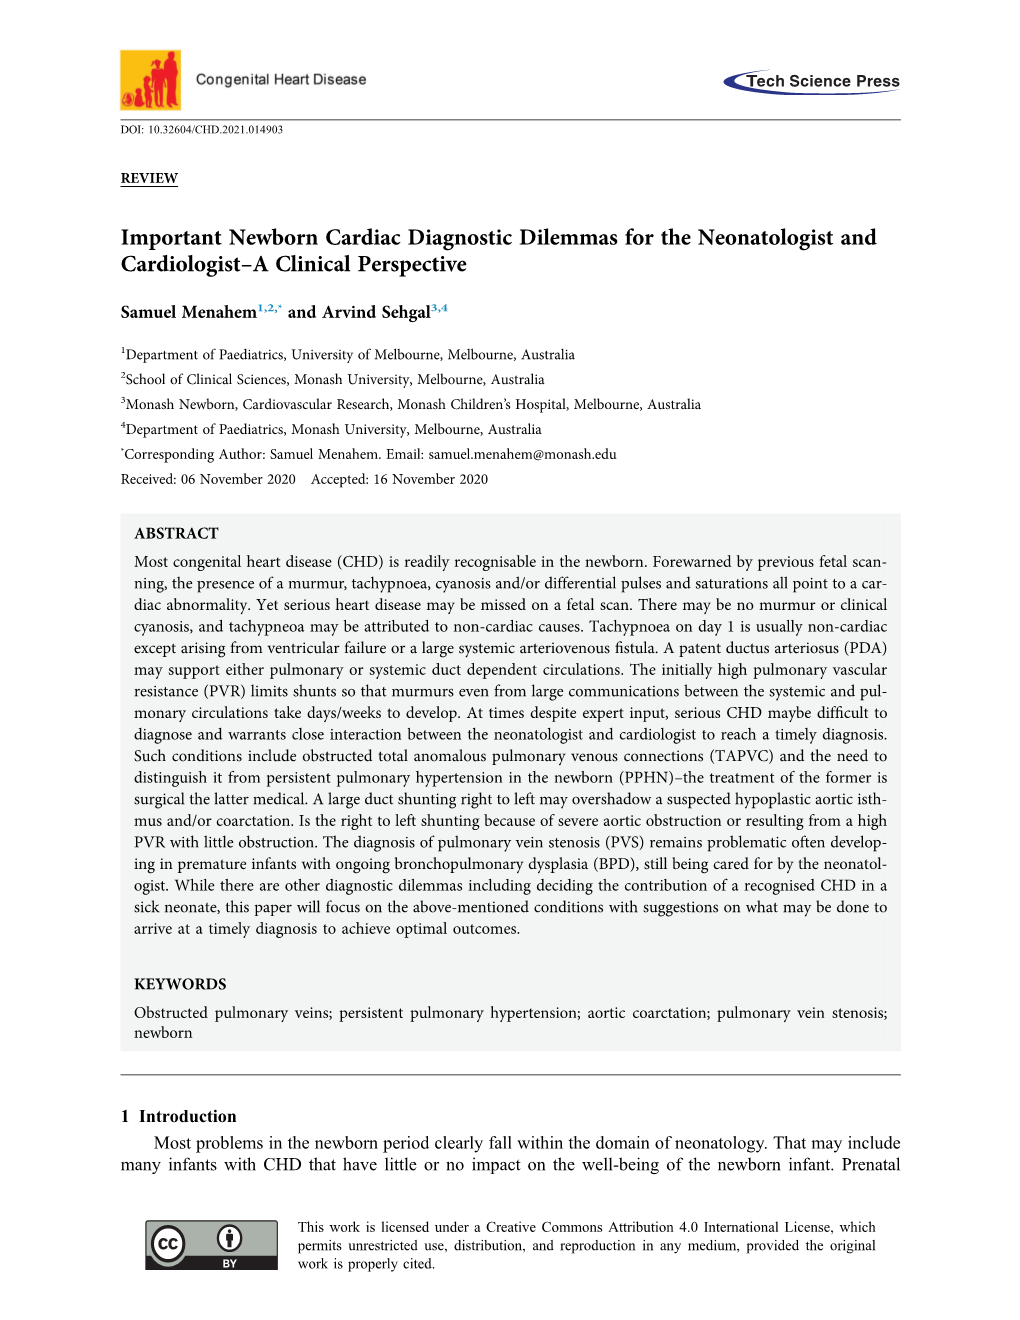 Important Newborn Cardiac Diagnostic Dilemmas for the Neonatologist and Cardiologist–A Clinical Perspective